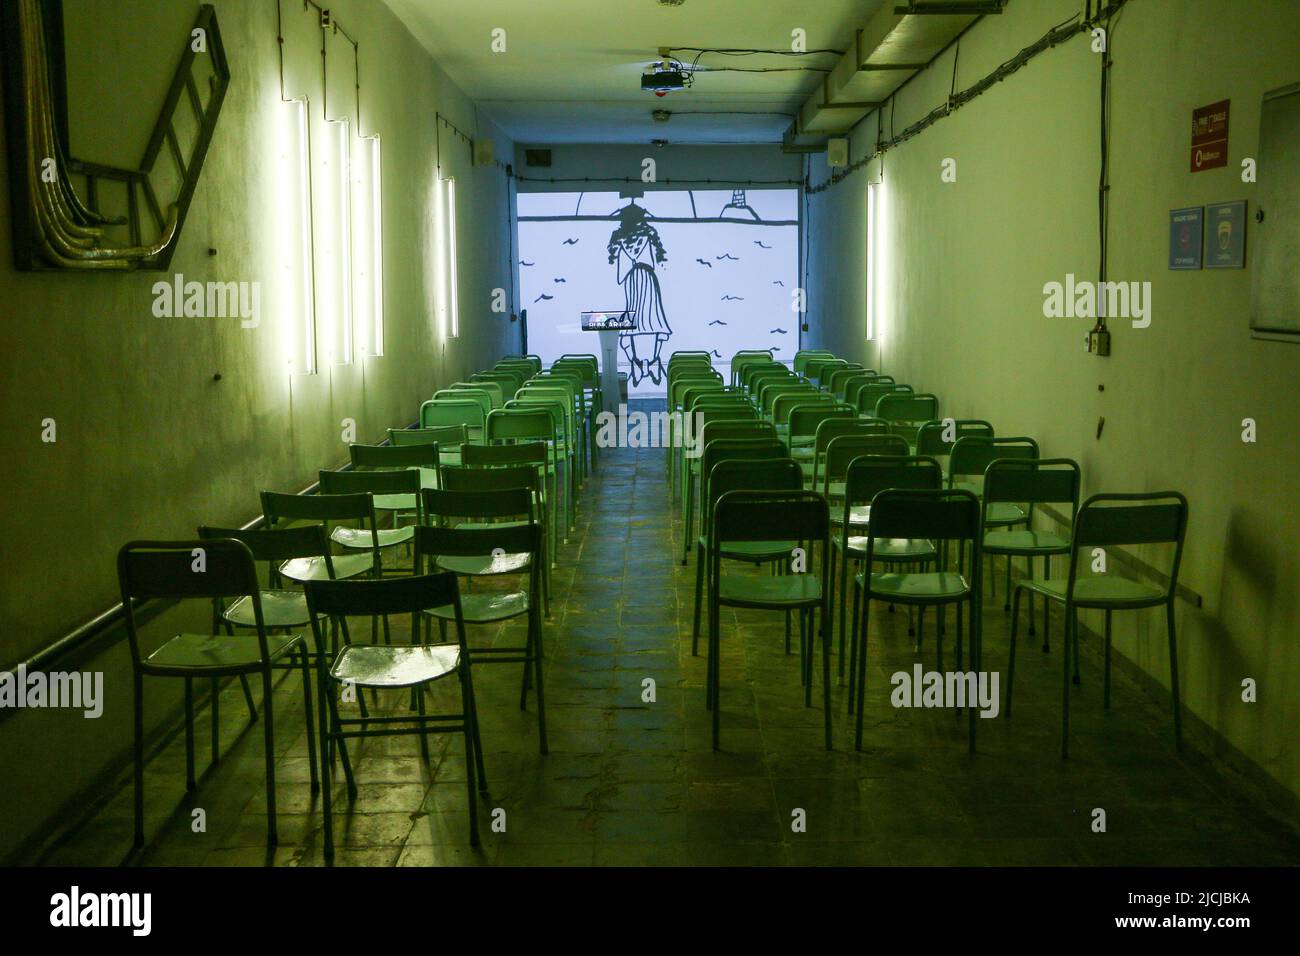 Tirana, Albania - 29.07.2017: Chairs standing in the row in green light in the meeting hall of the Tirana nuclear bunker in city center transformed in Stock Photo